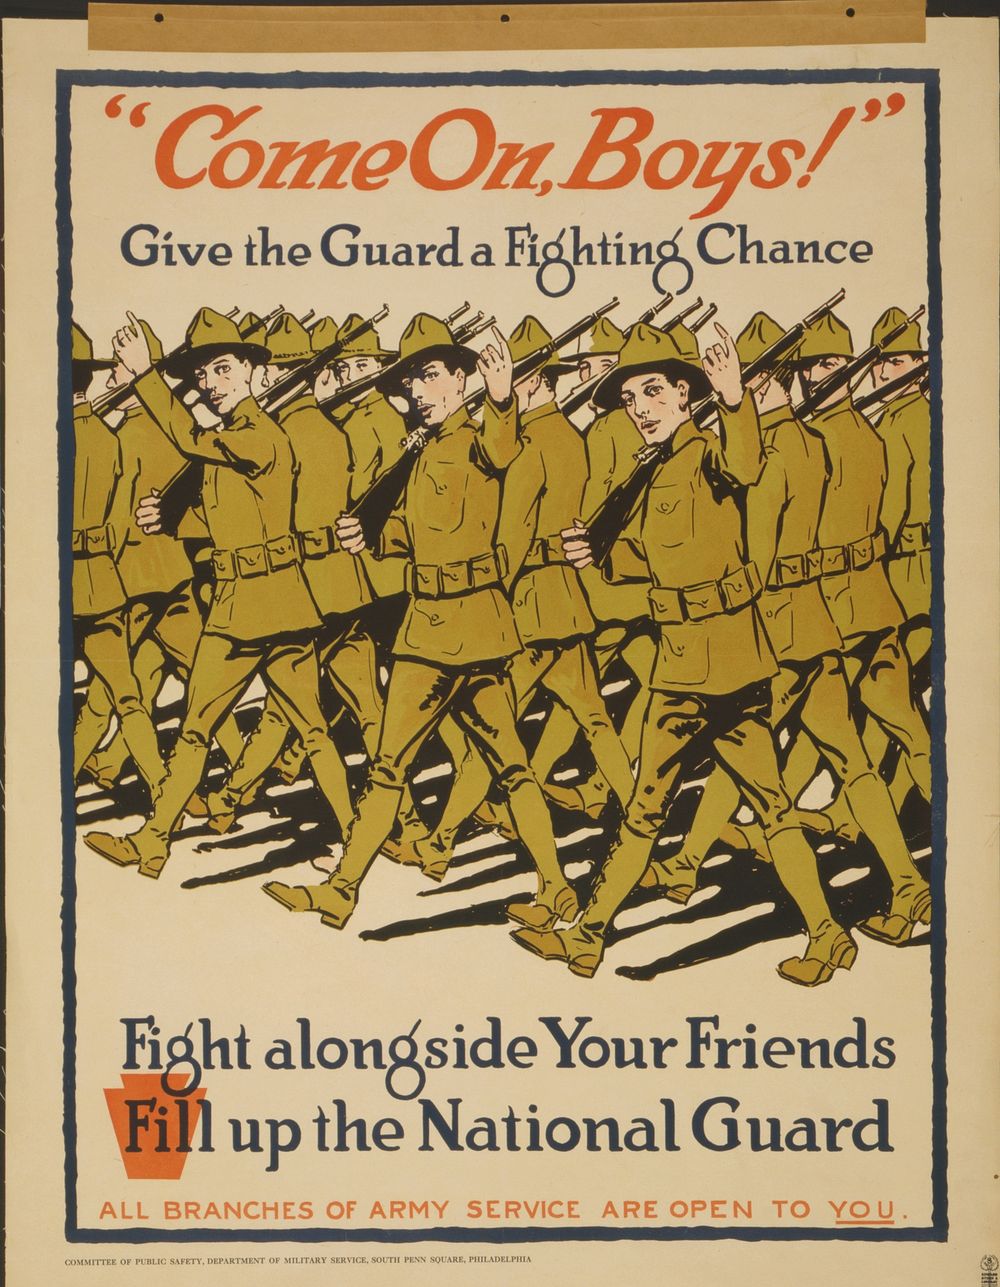 "Come on, Boys!" Give the Guard a fighting chance Fight alongside your friends - Fill up the National Guard.